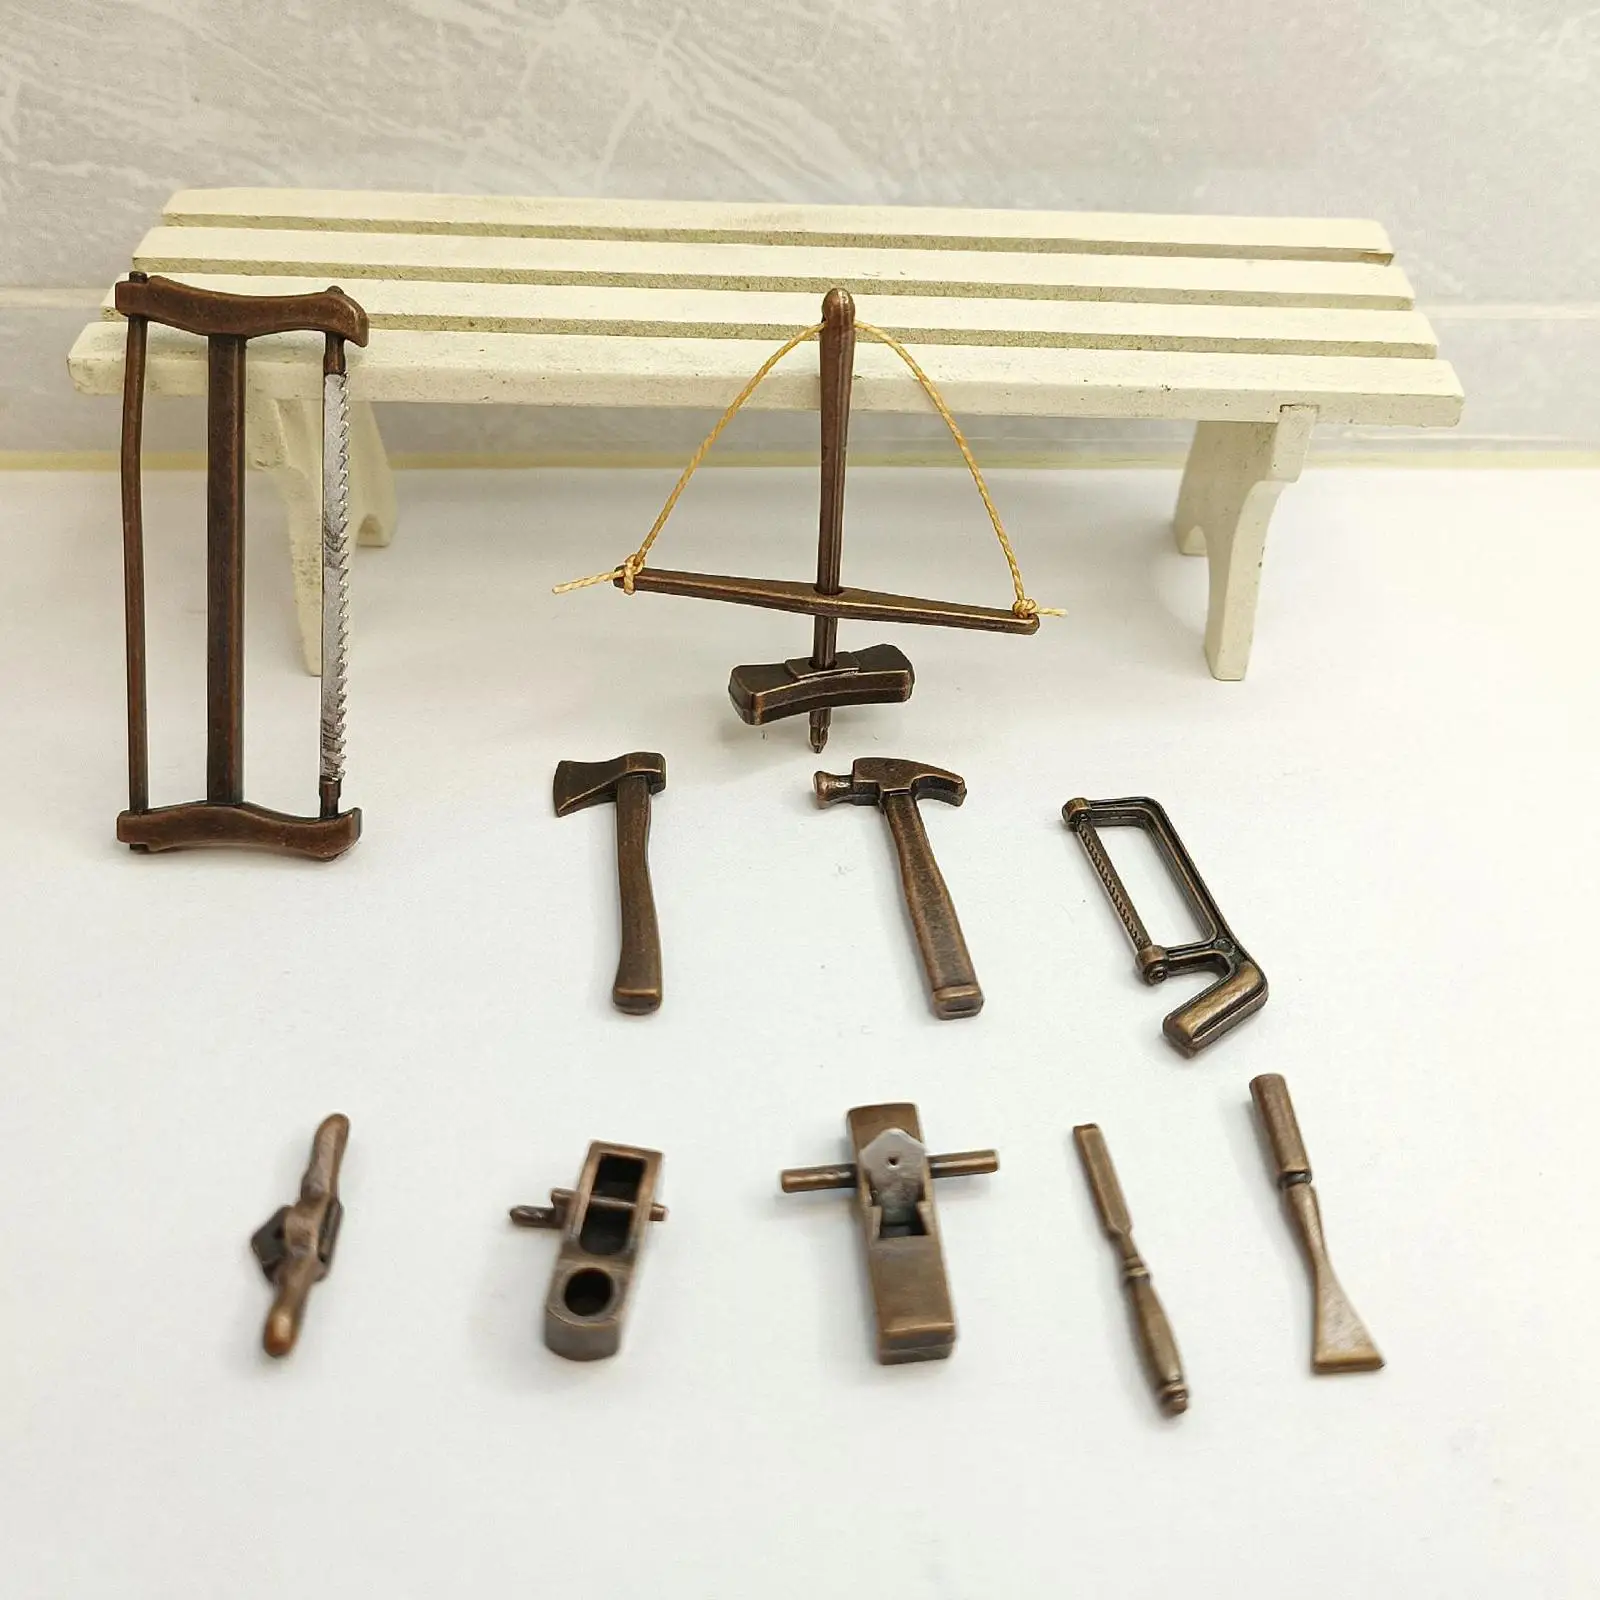 10Pcs Miniature Doll House Tools Pretend Play for Dollhouse Decoration